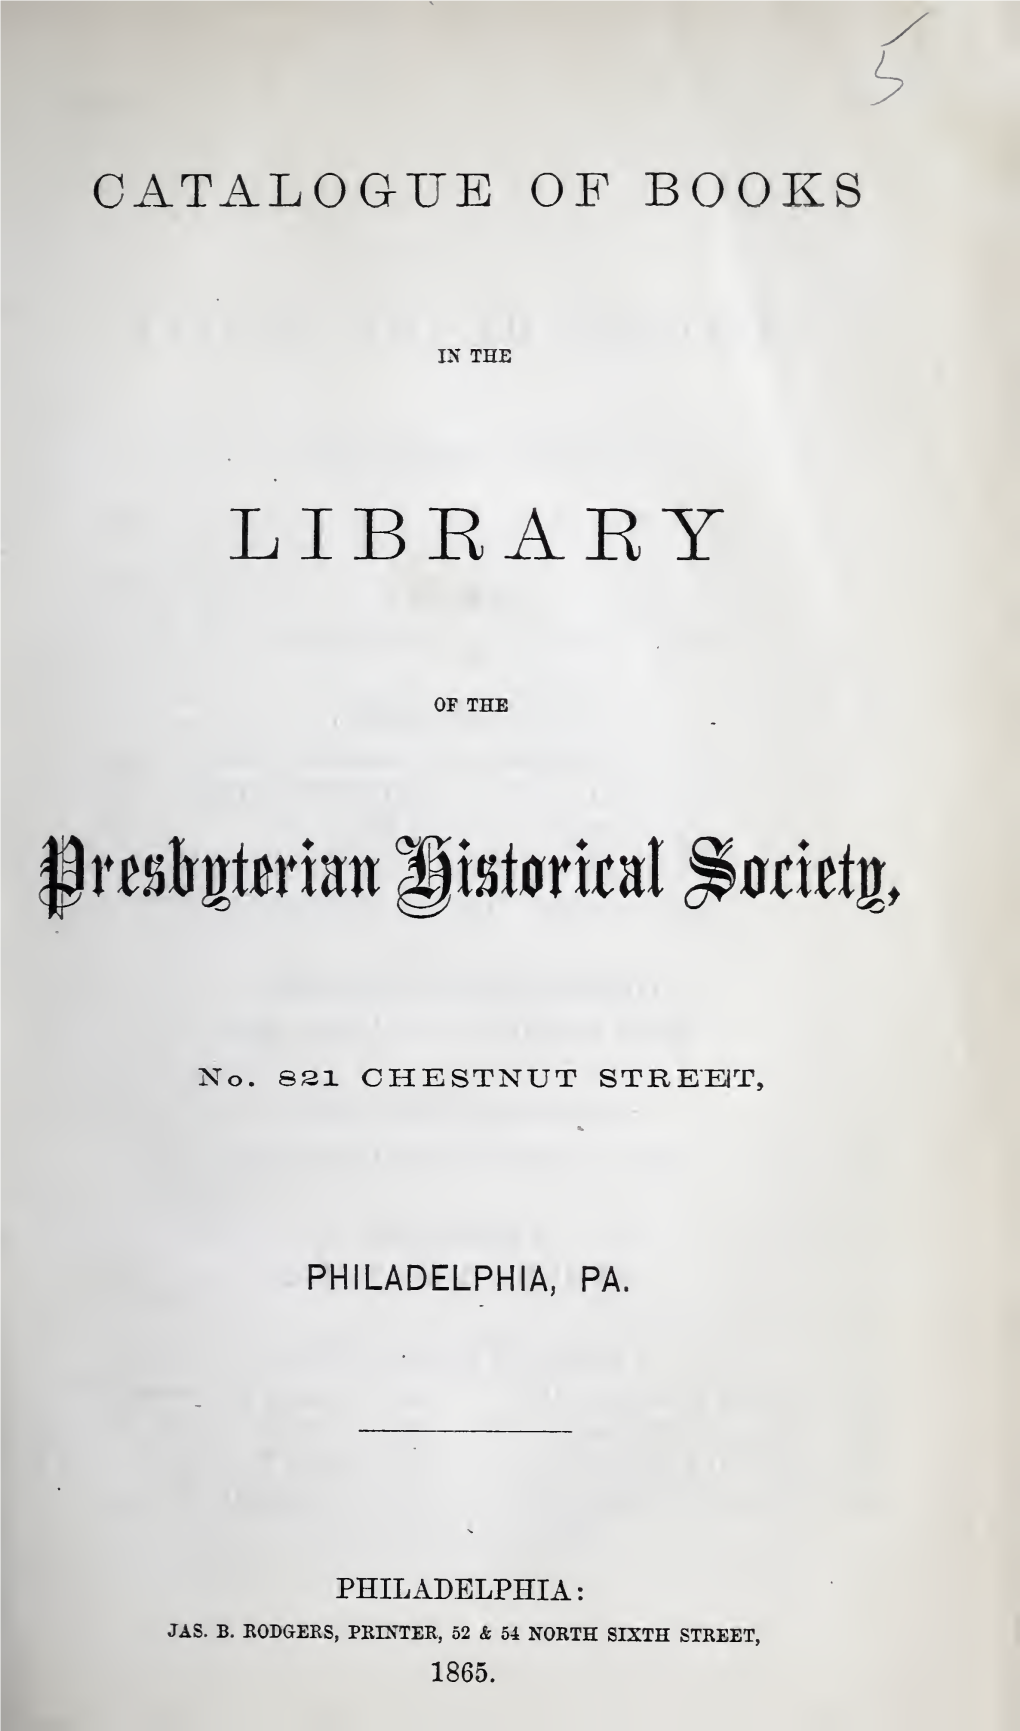 Catalogue of Books in the Library of the Presbyterian Historical Society